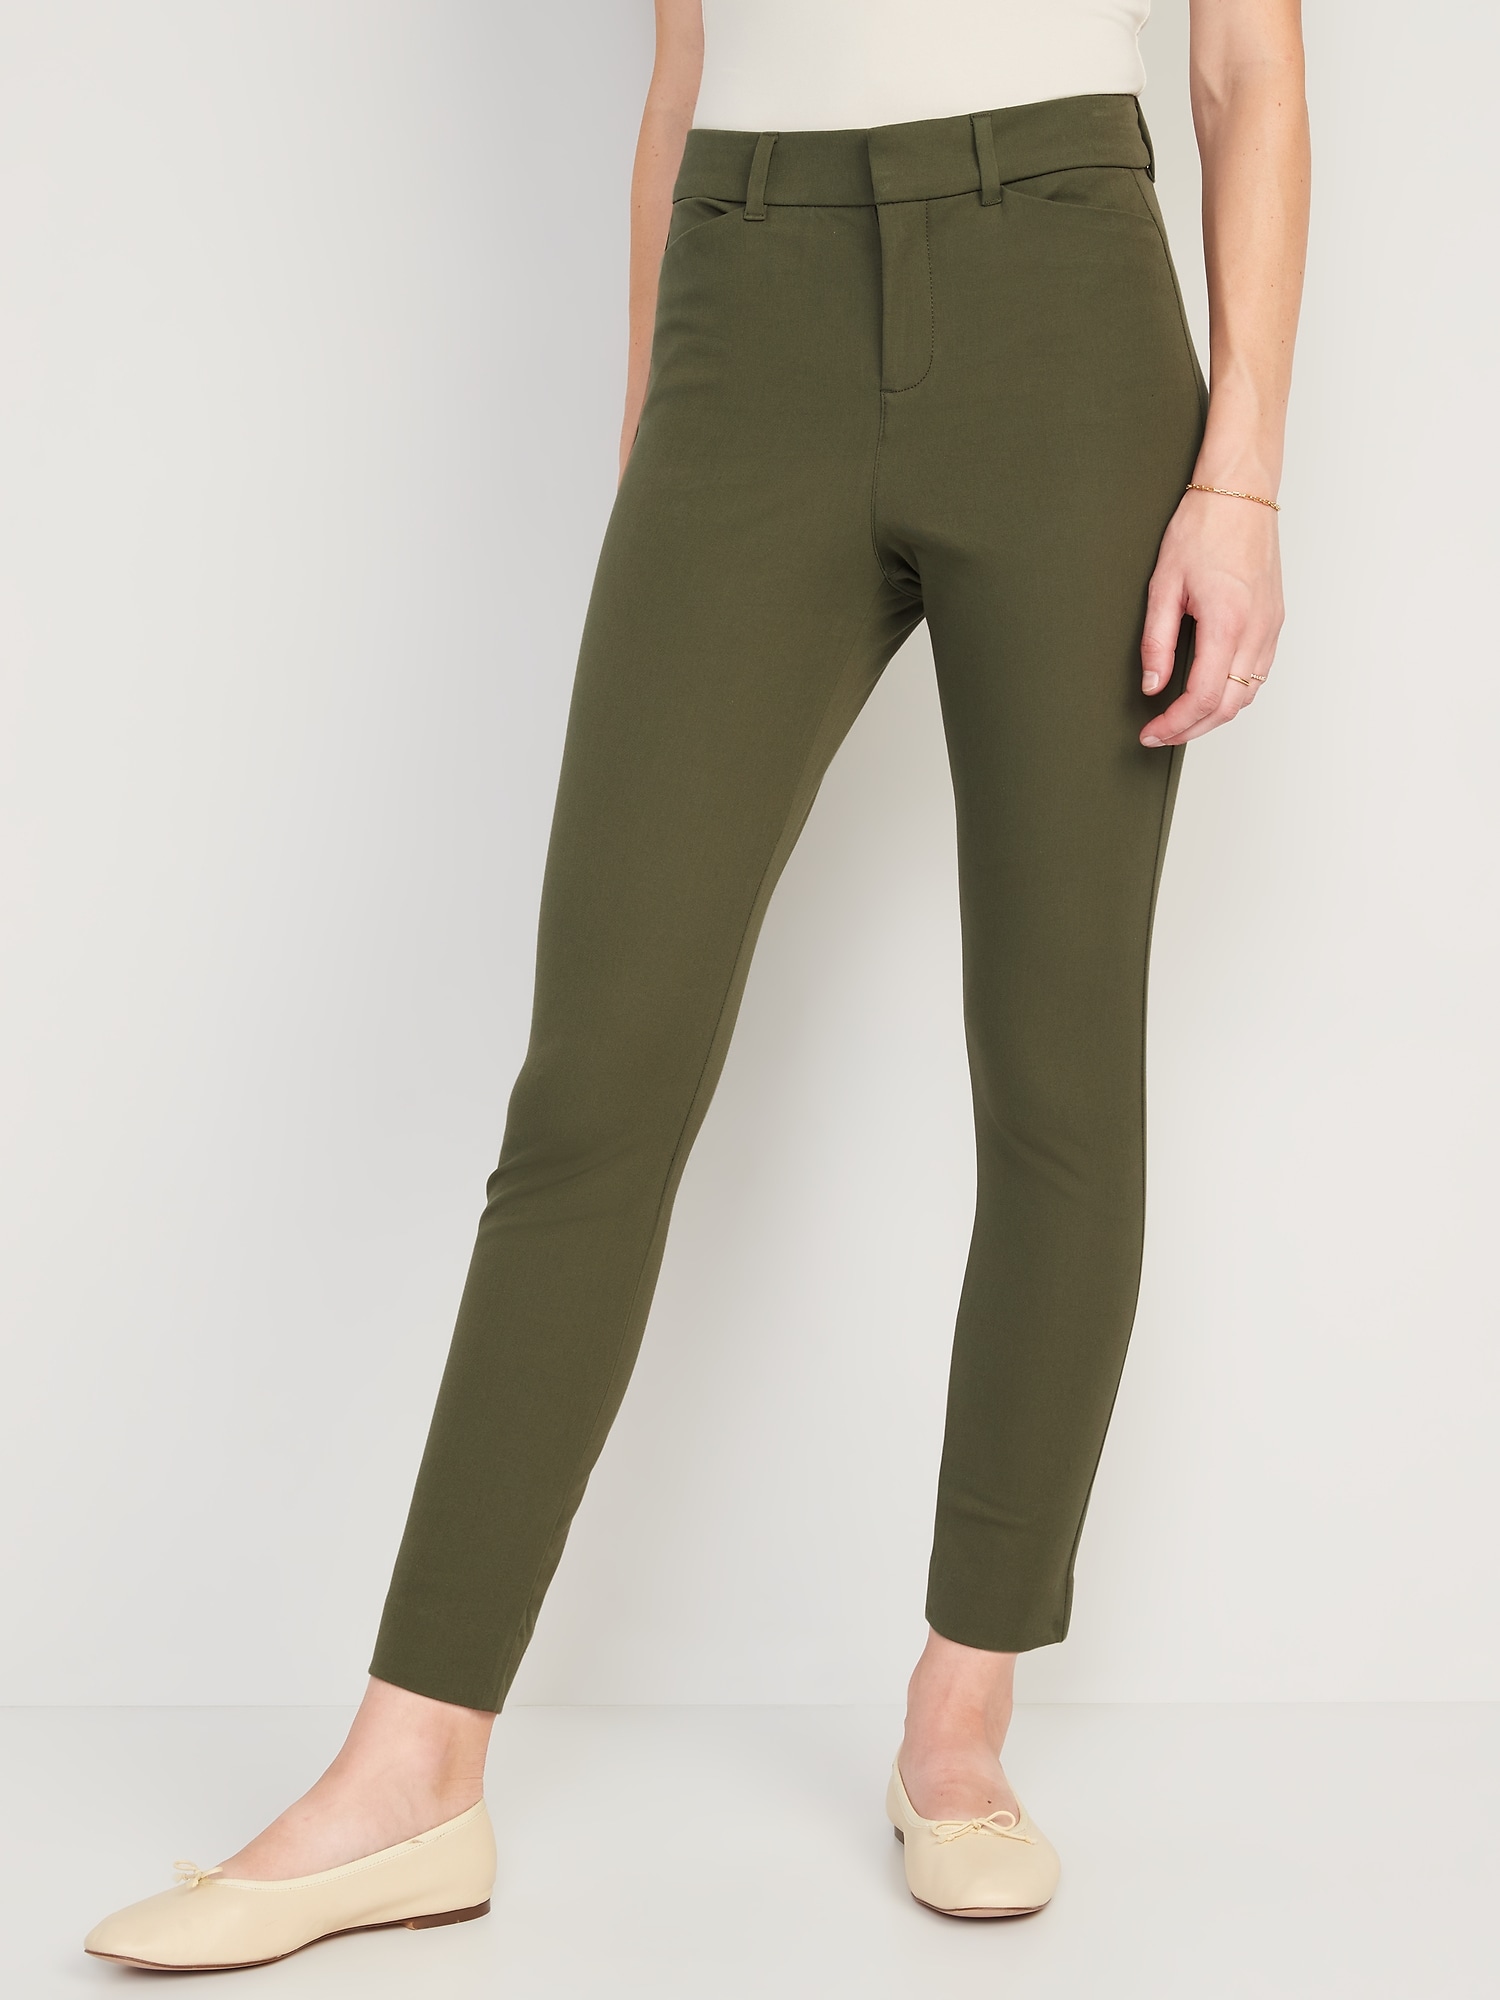 Old Navy High-Waisted Pixie Skinny Ankle Pants green. 1